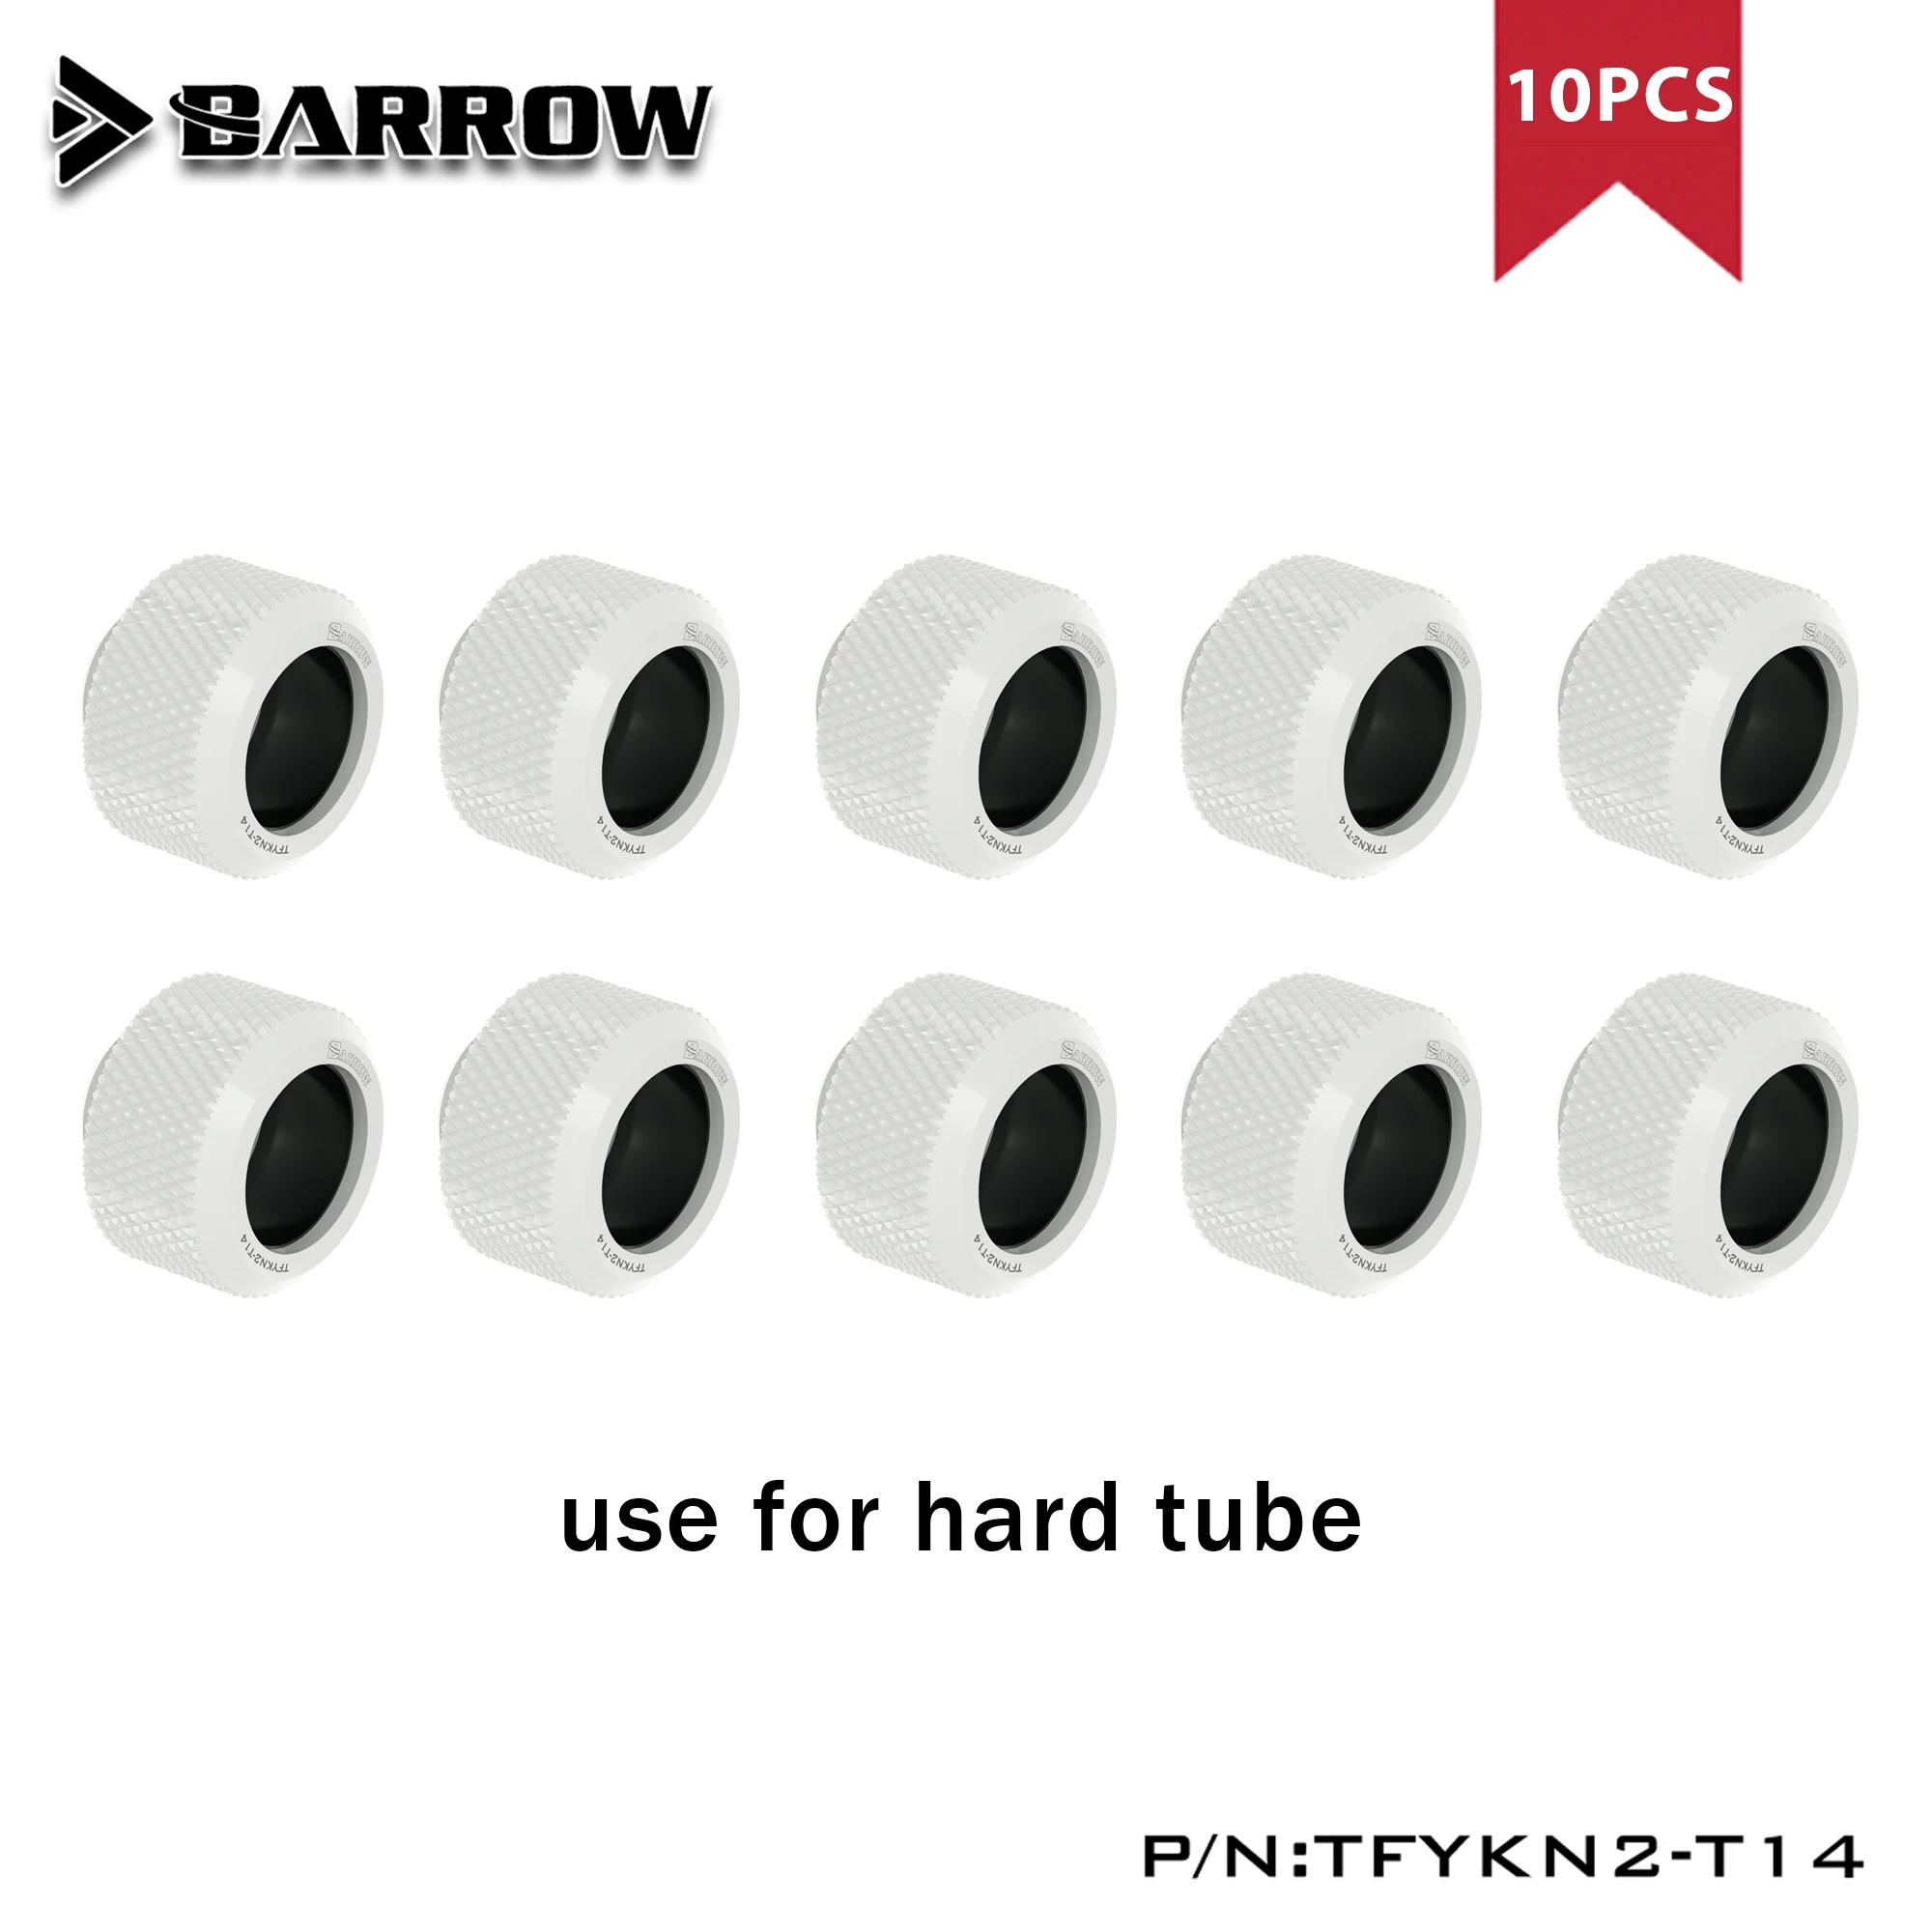 

Anti-Off Tpye Hard Tube Fitting Barrow Adapter Suitable For OD14mm / OD16mm Rigid Pipe Water Cooling, 10pcs, TFYKN2-T14/16